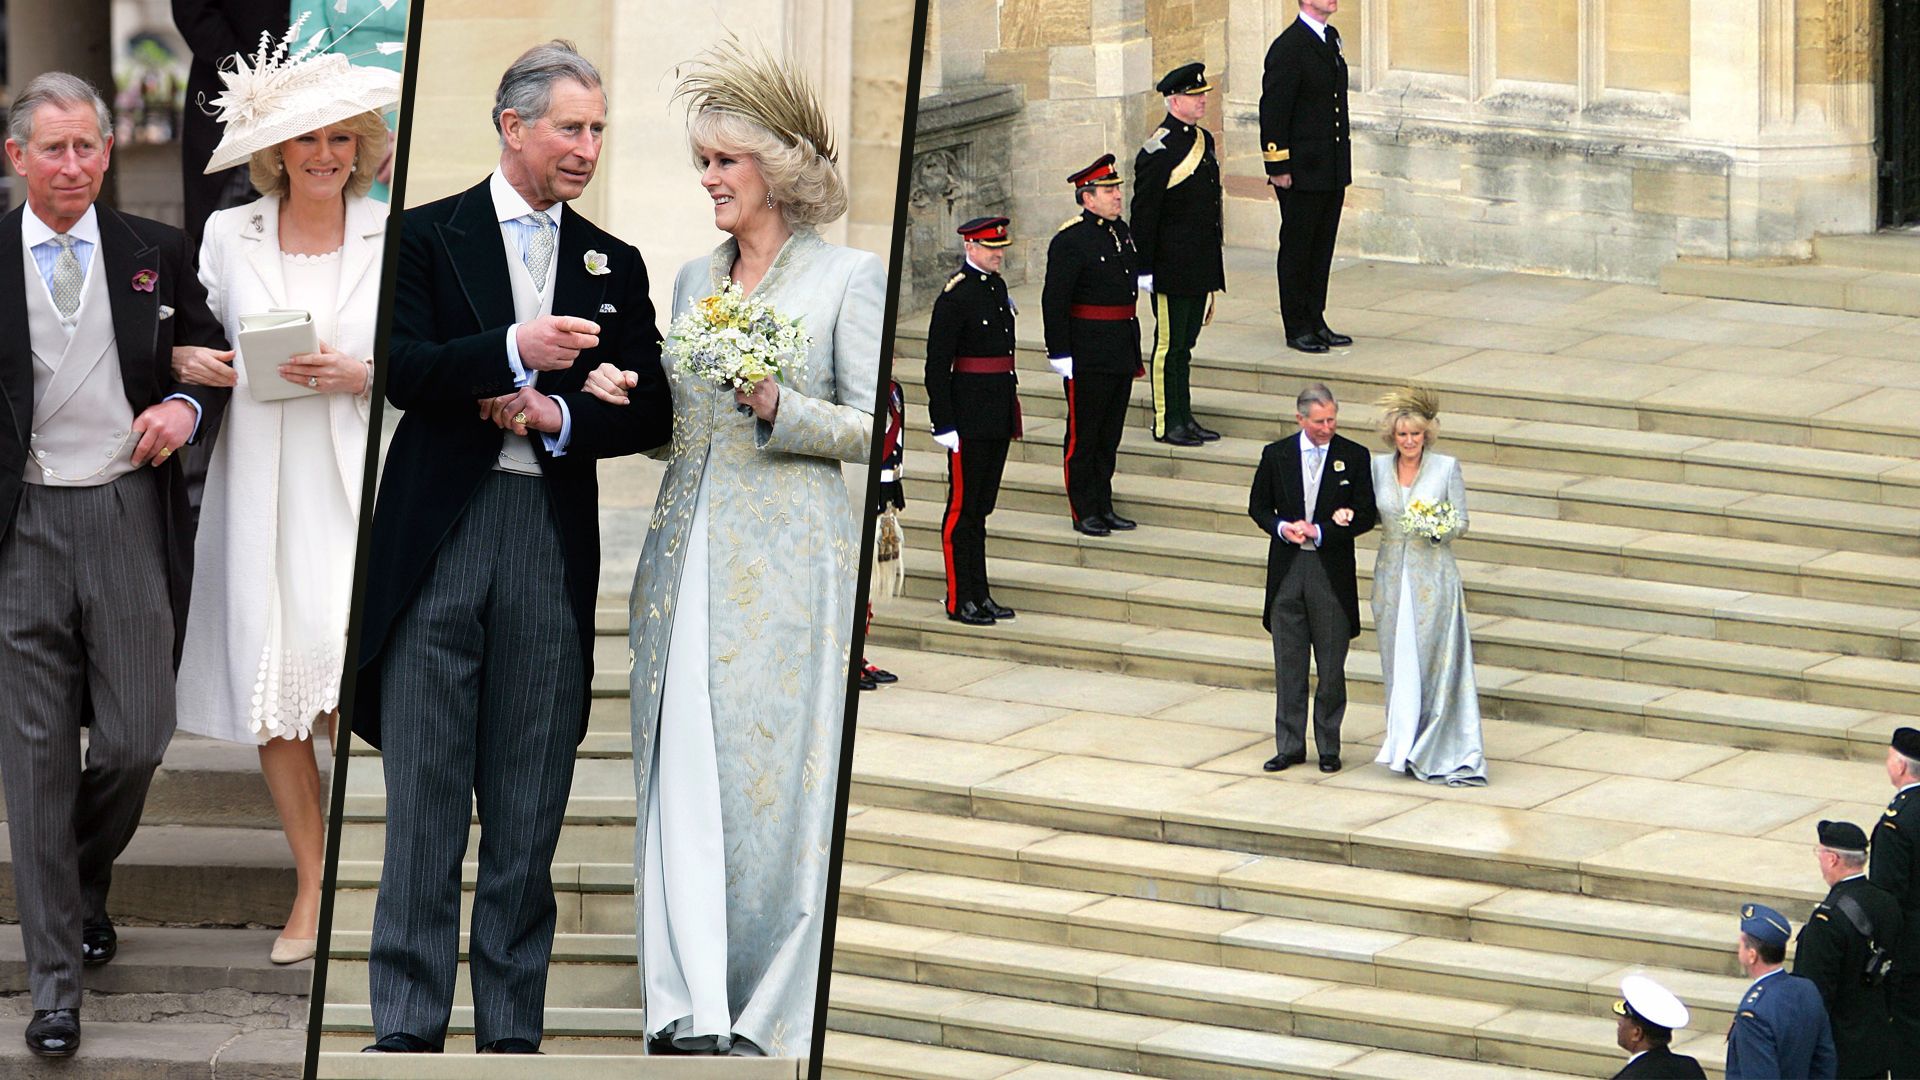 King Charles and Queen Camilla's wedding